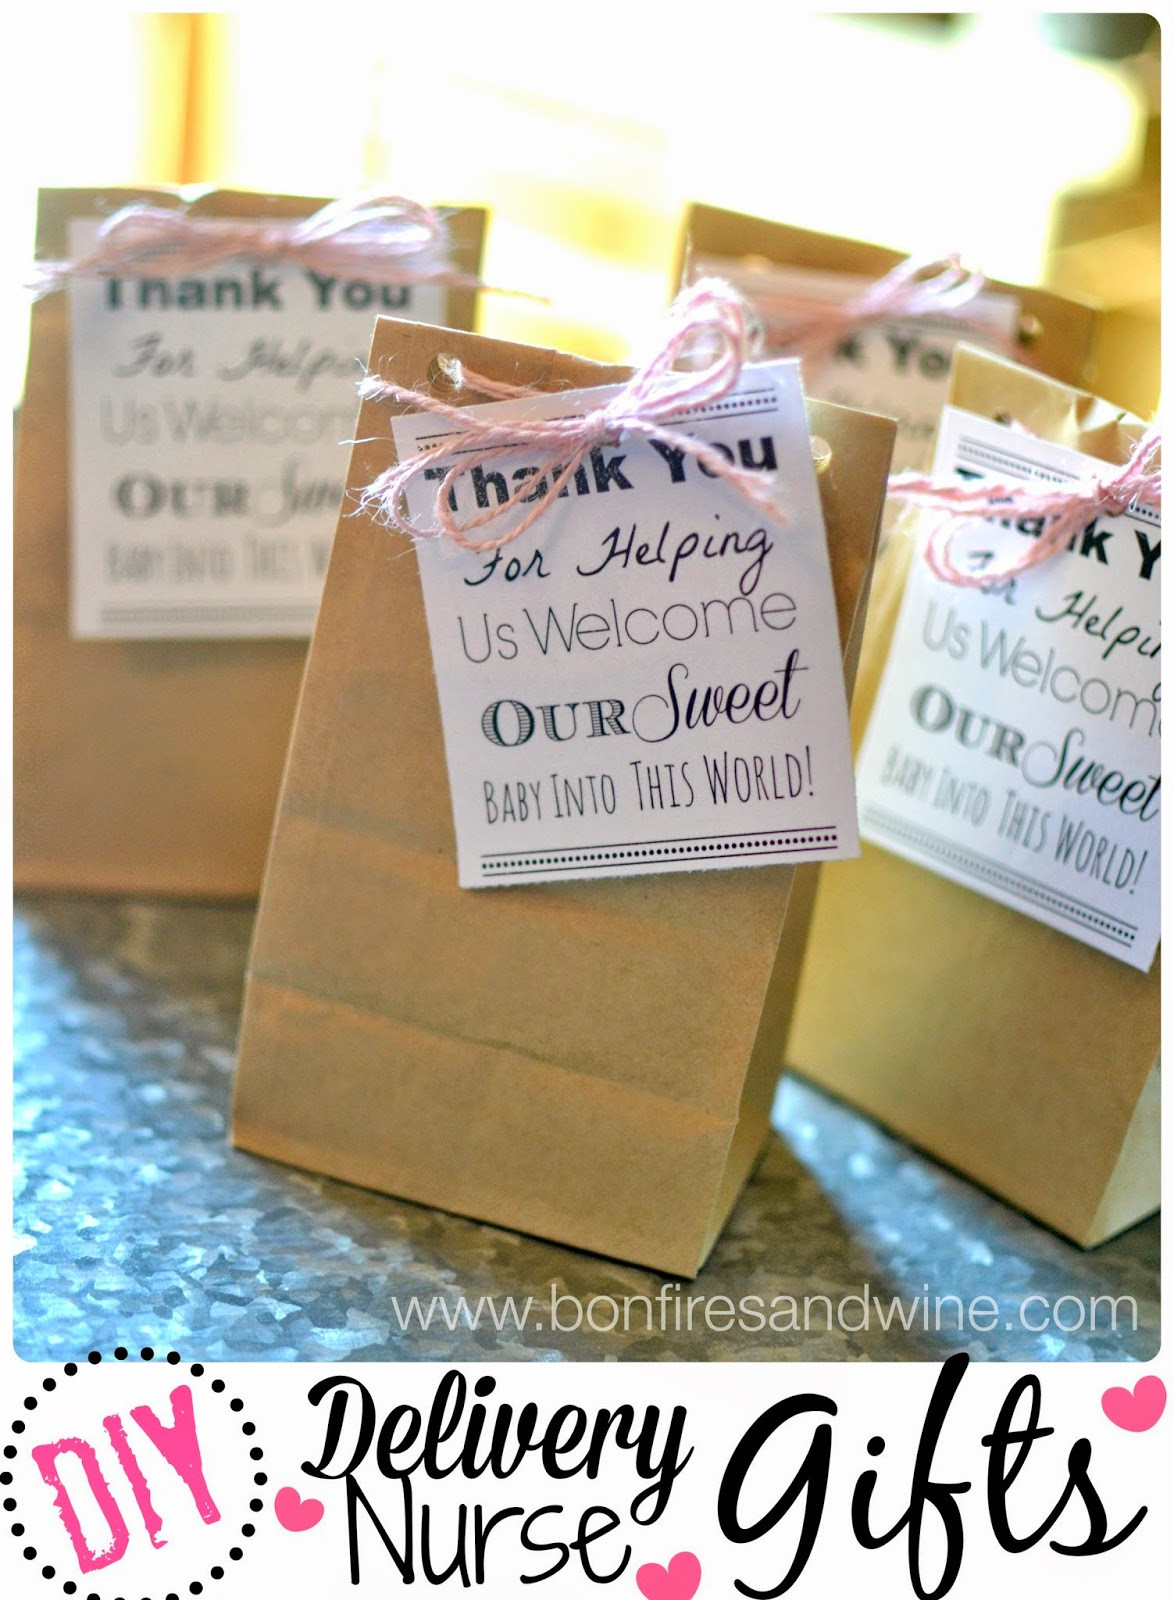 Labor Day Gifts
 Bonfires and Wine DIY Labor & Delivery Nurse Gifts